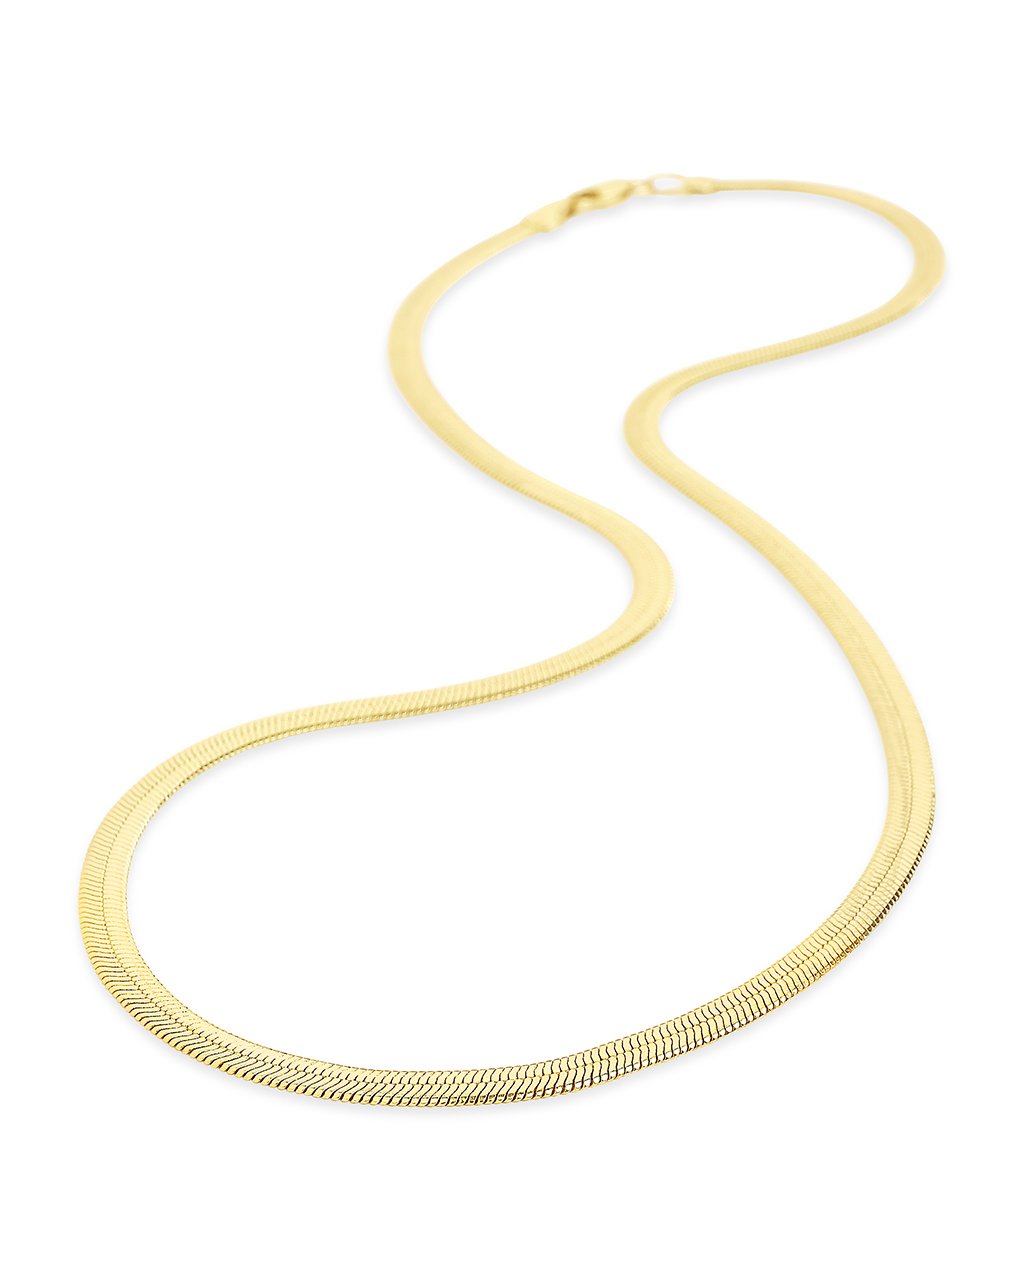 Herringbone Chain Necklace Sterling Forever Gold 18" 